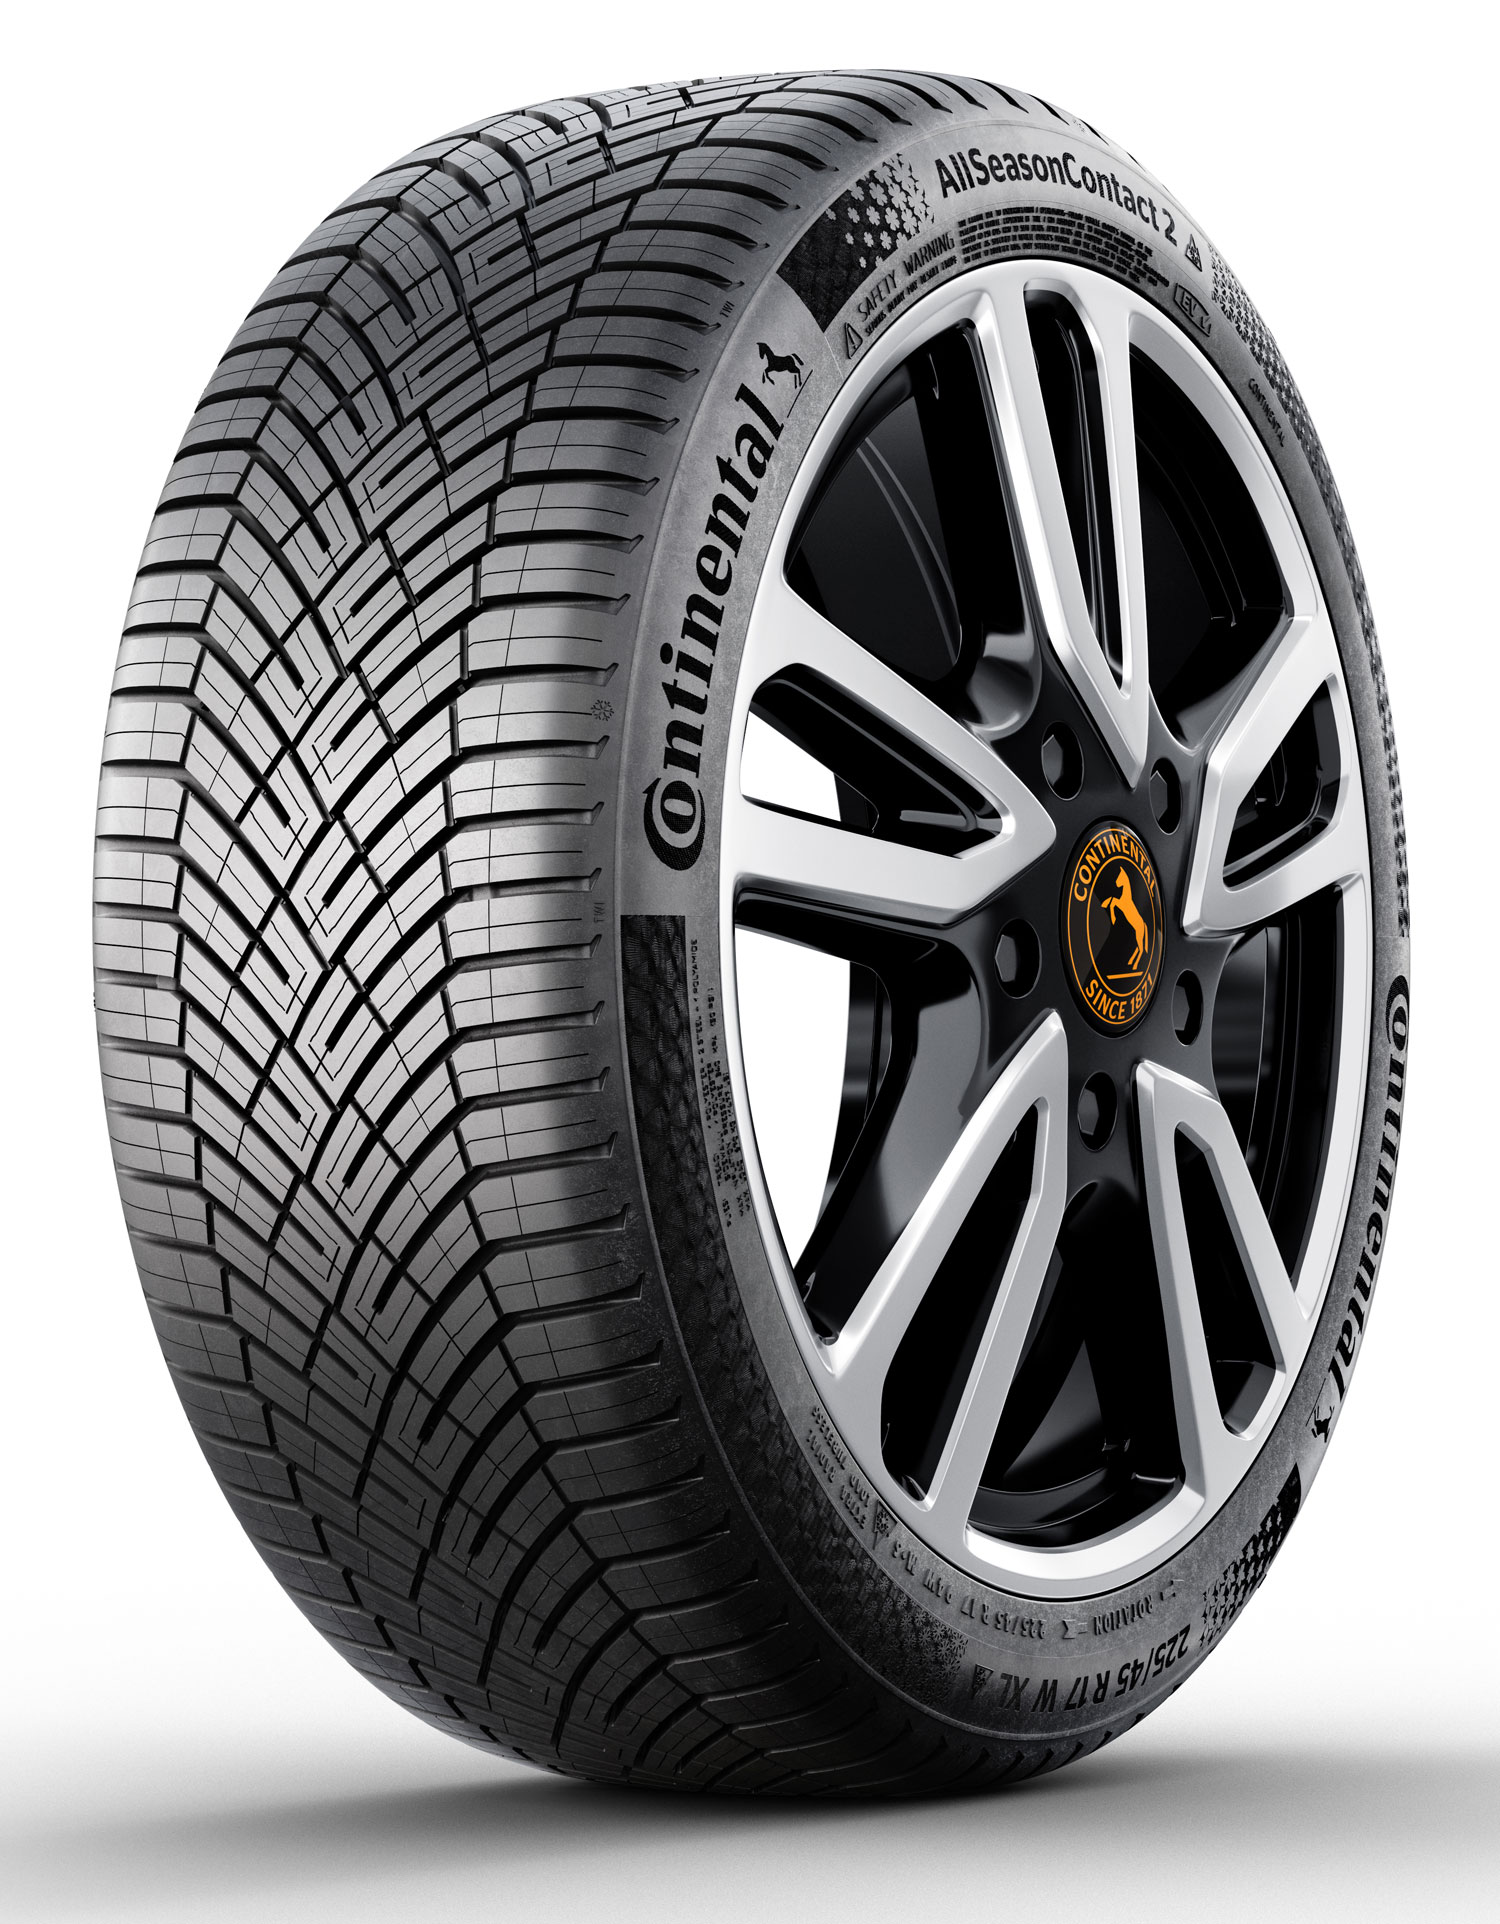 Gomme Nuove Continental 285/40 R21 109Y ALLSEASONCONTACT 2 XL M+S pneumatici nuovi All Season